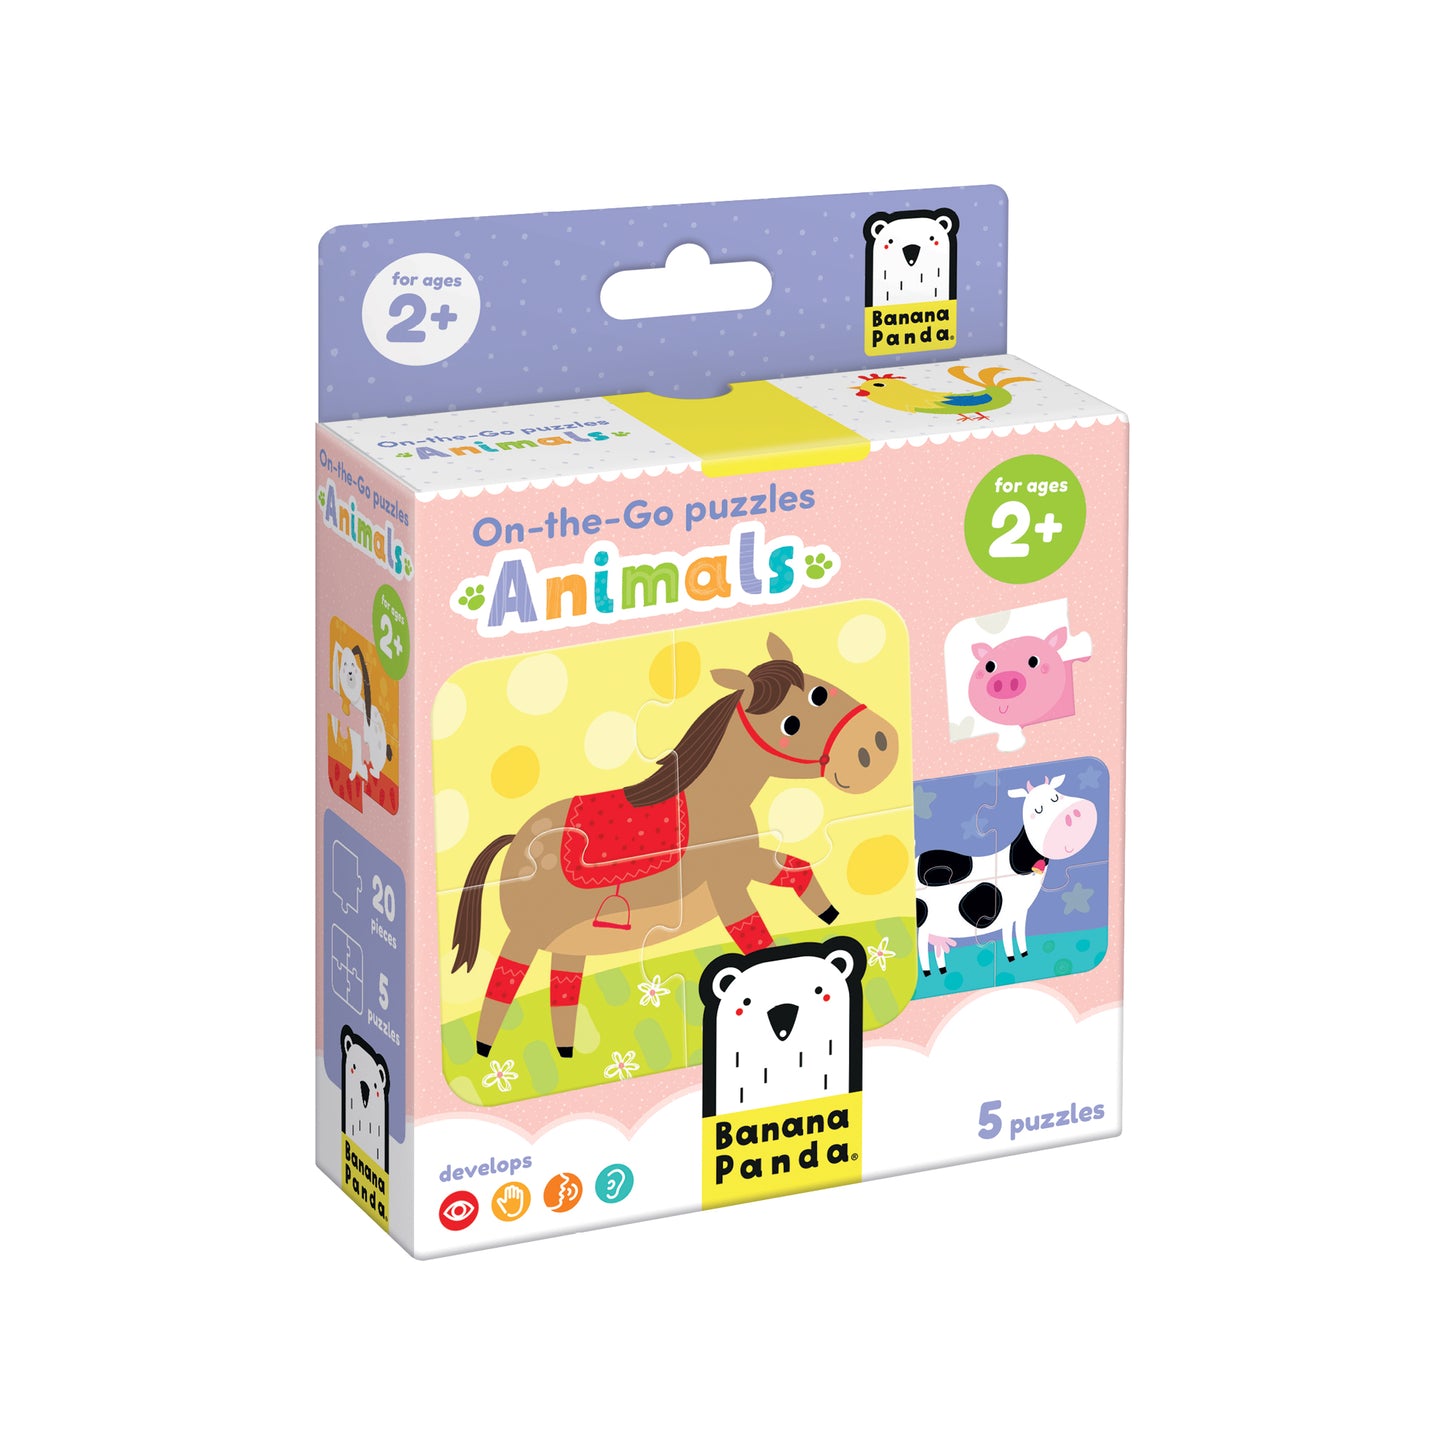 On-the-Go Puzzles Animals